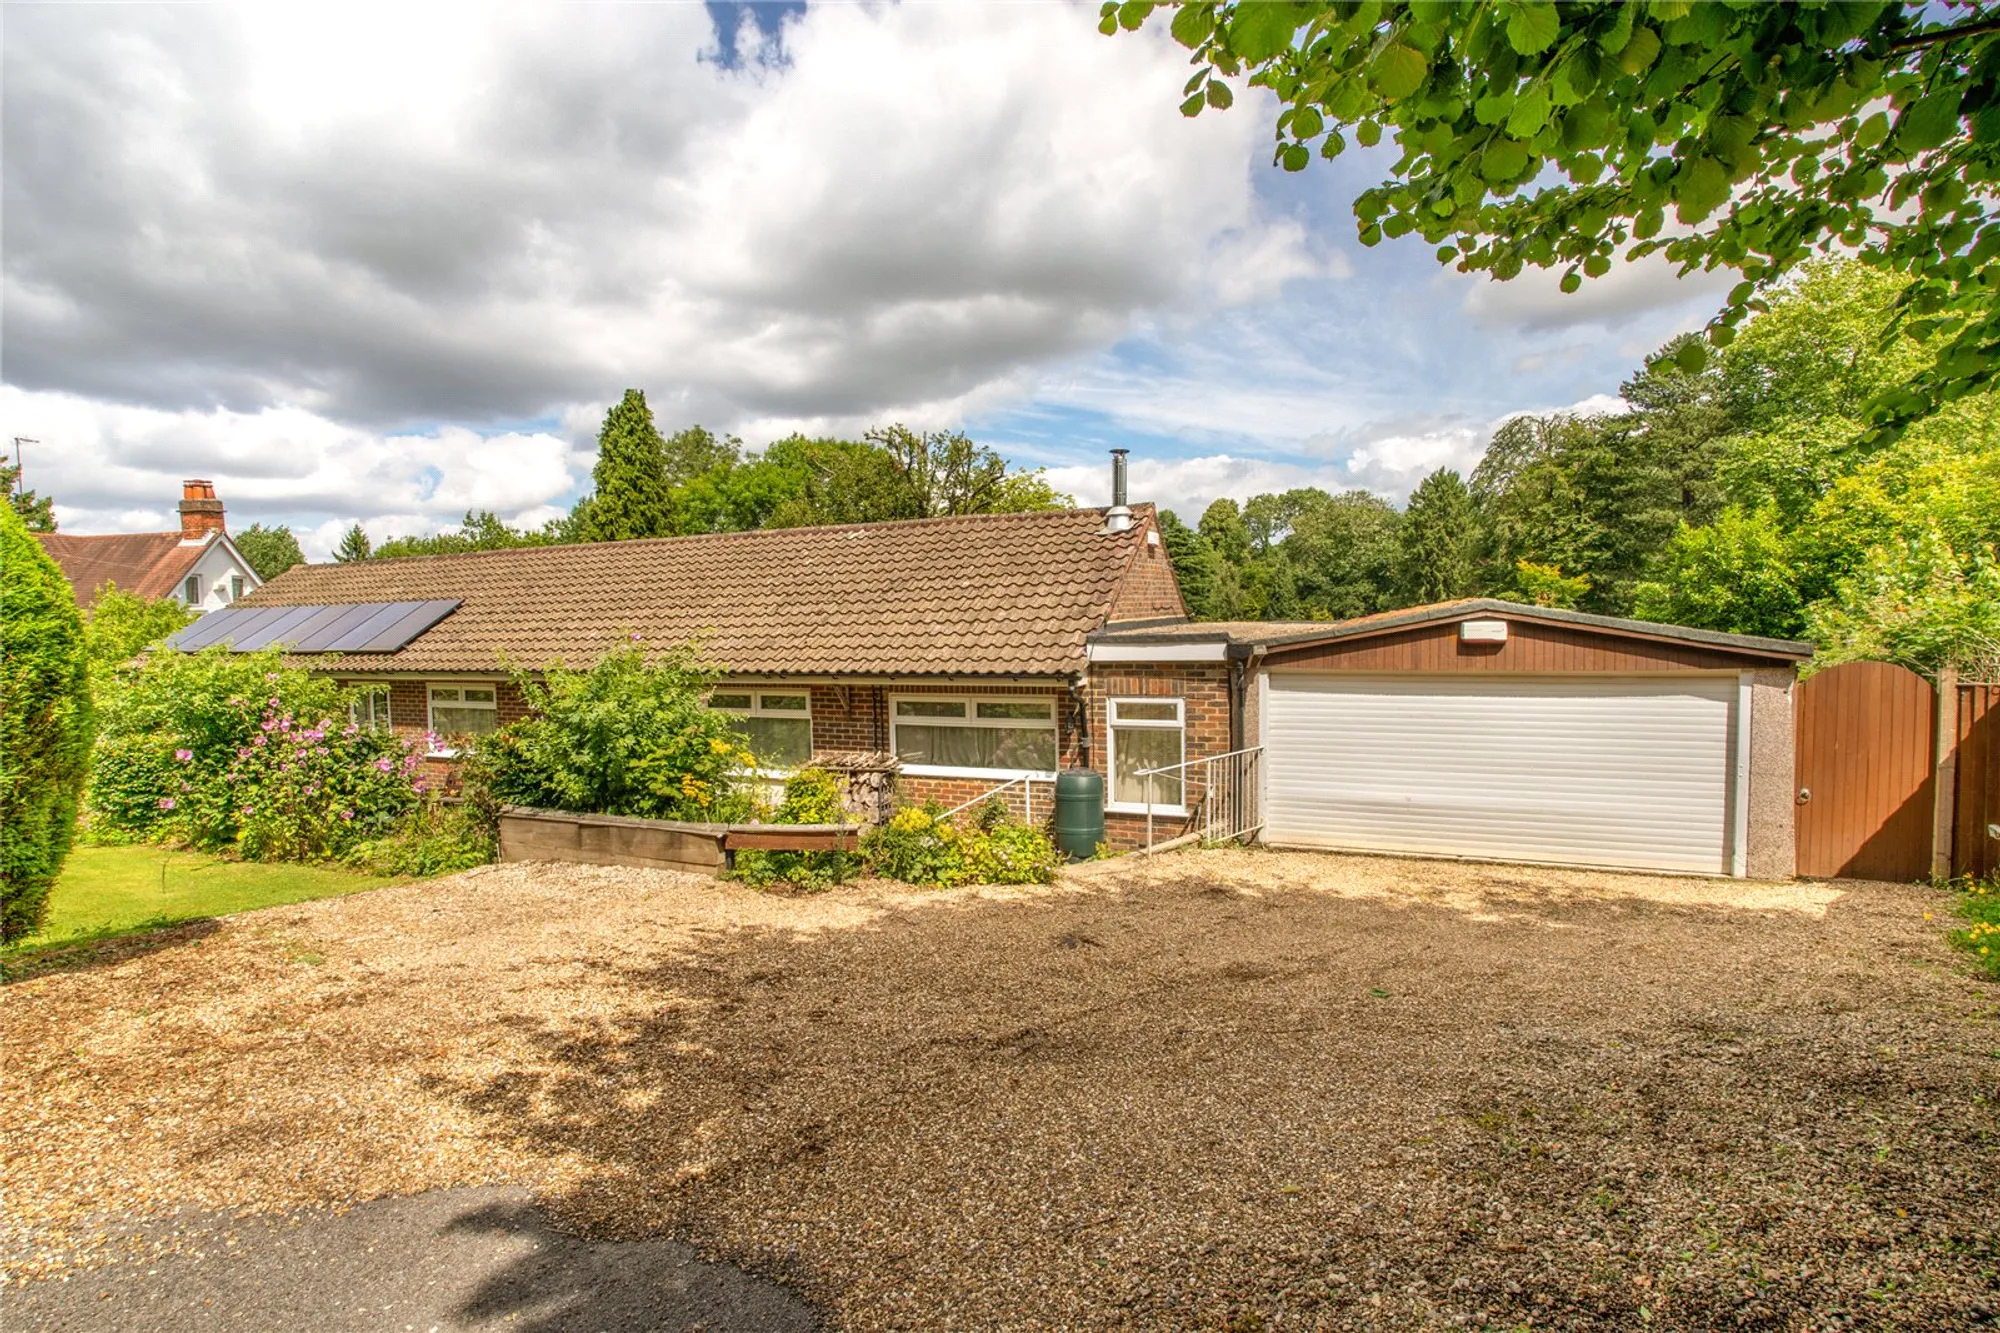 3 bed detached bungalow for sale in Station Road, Caterham - Property Image 1